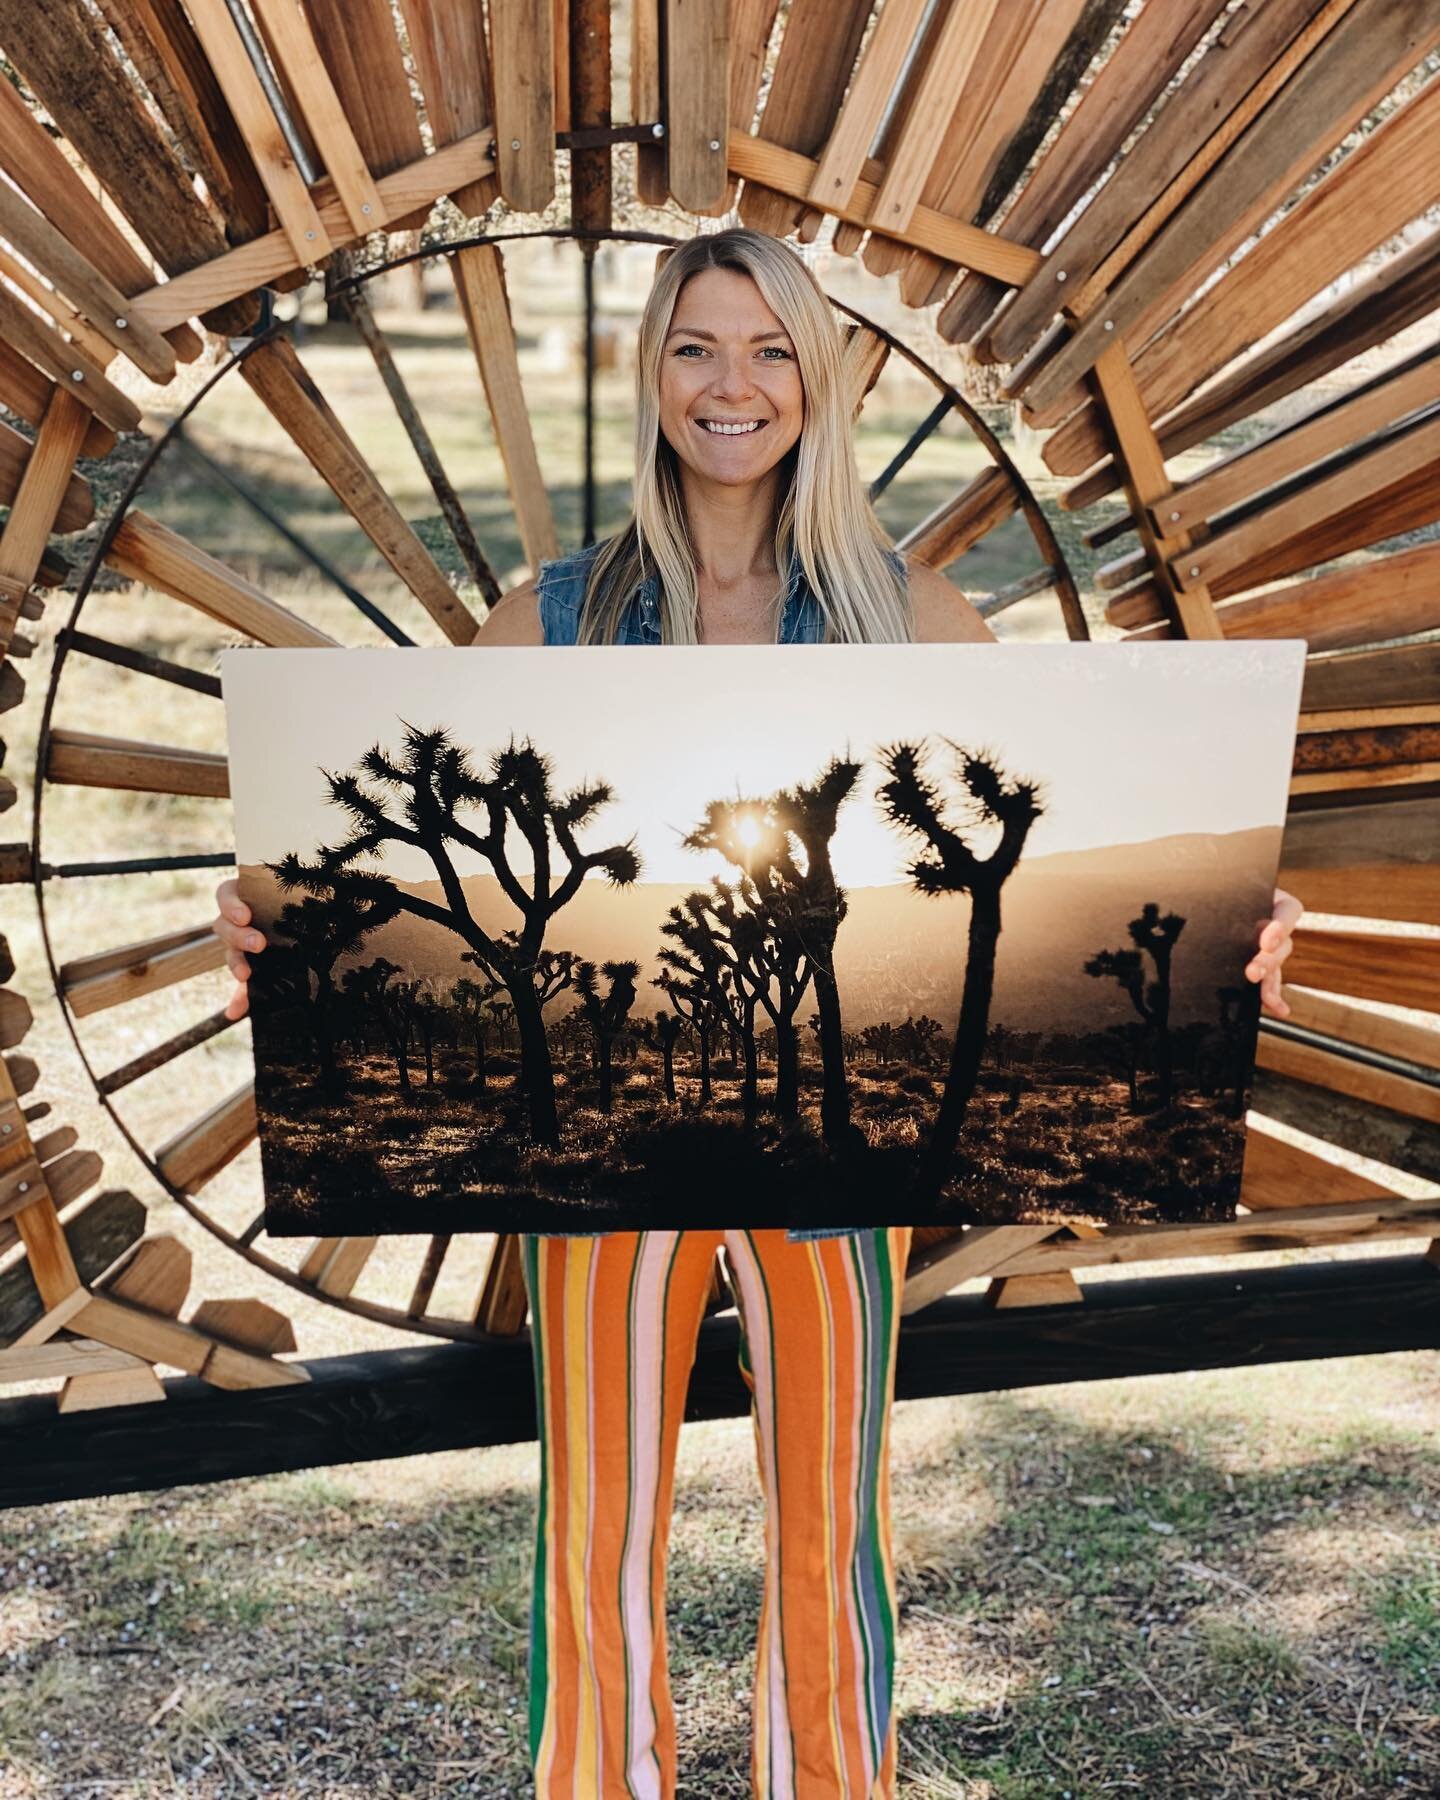 New outdoor inspired wall art coming to my Etsy shop soon! Stay tuned for all things groovy✨.